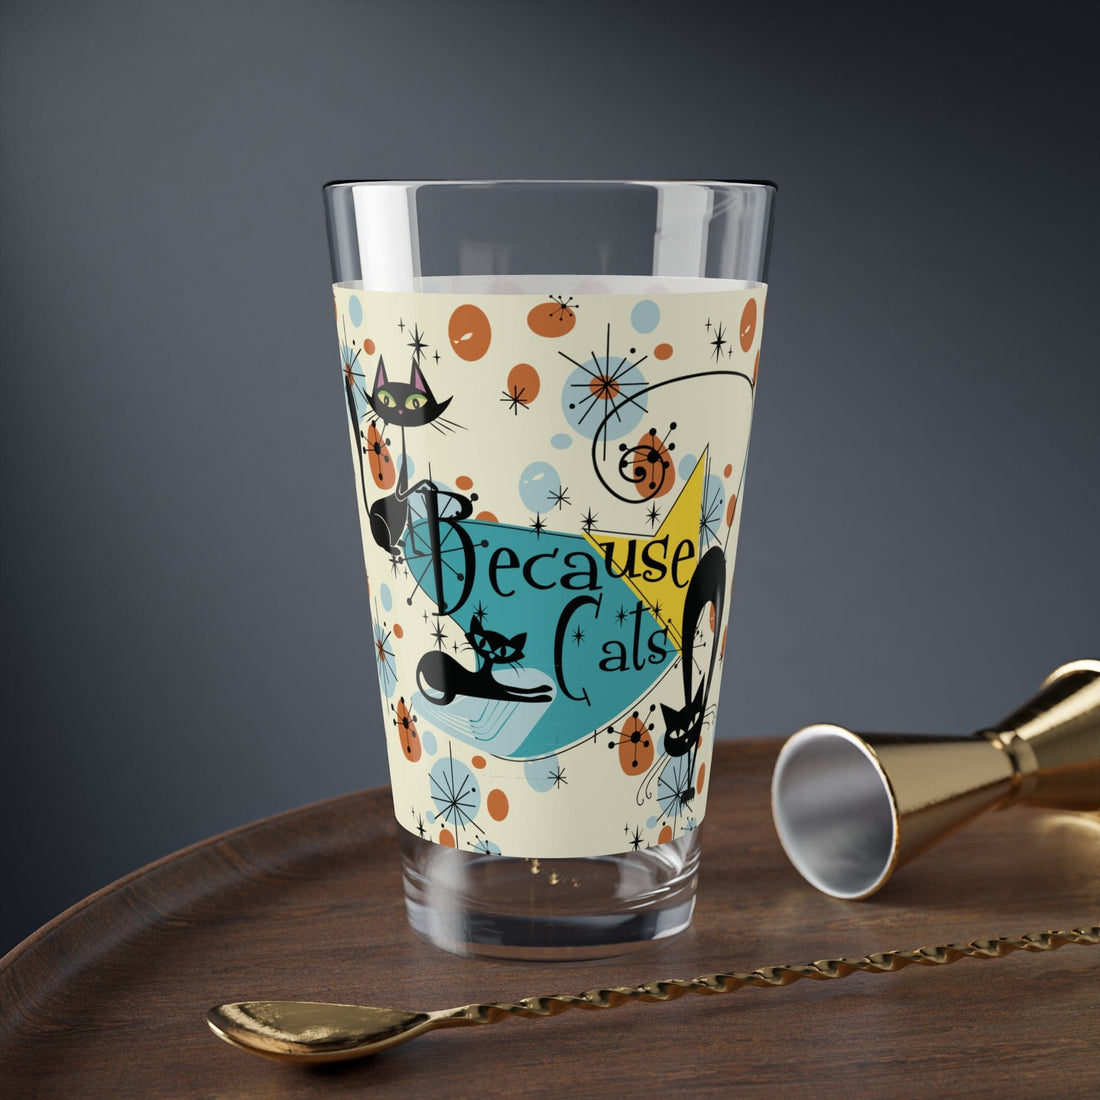 Kate McEnroe New York Because Cats, 50s Atomic Cats Kitschy Mid Century Modern Retro Glassware, Mixing, Shaker, Drinking Glass, MCM Party Drinkware, Cat Mom Gift Mixing Glasses 16oz 25685458490764878862